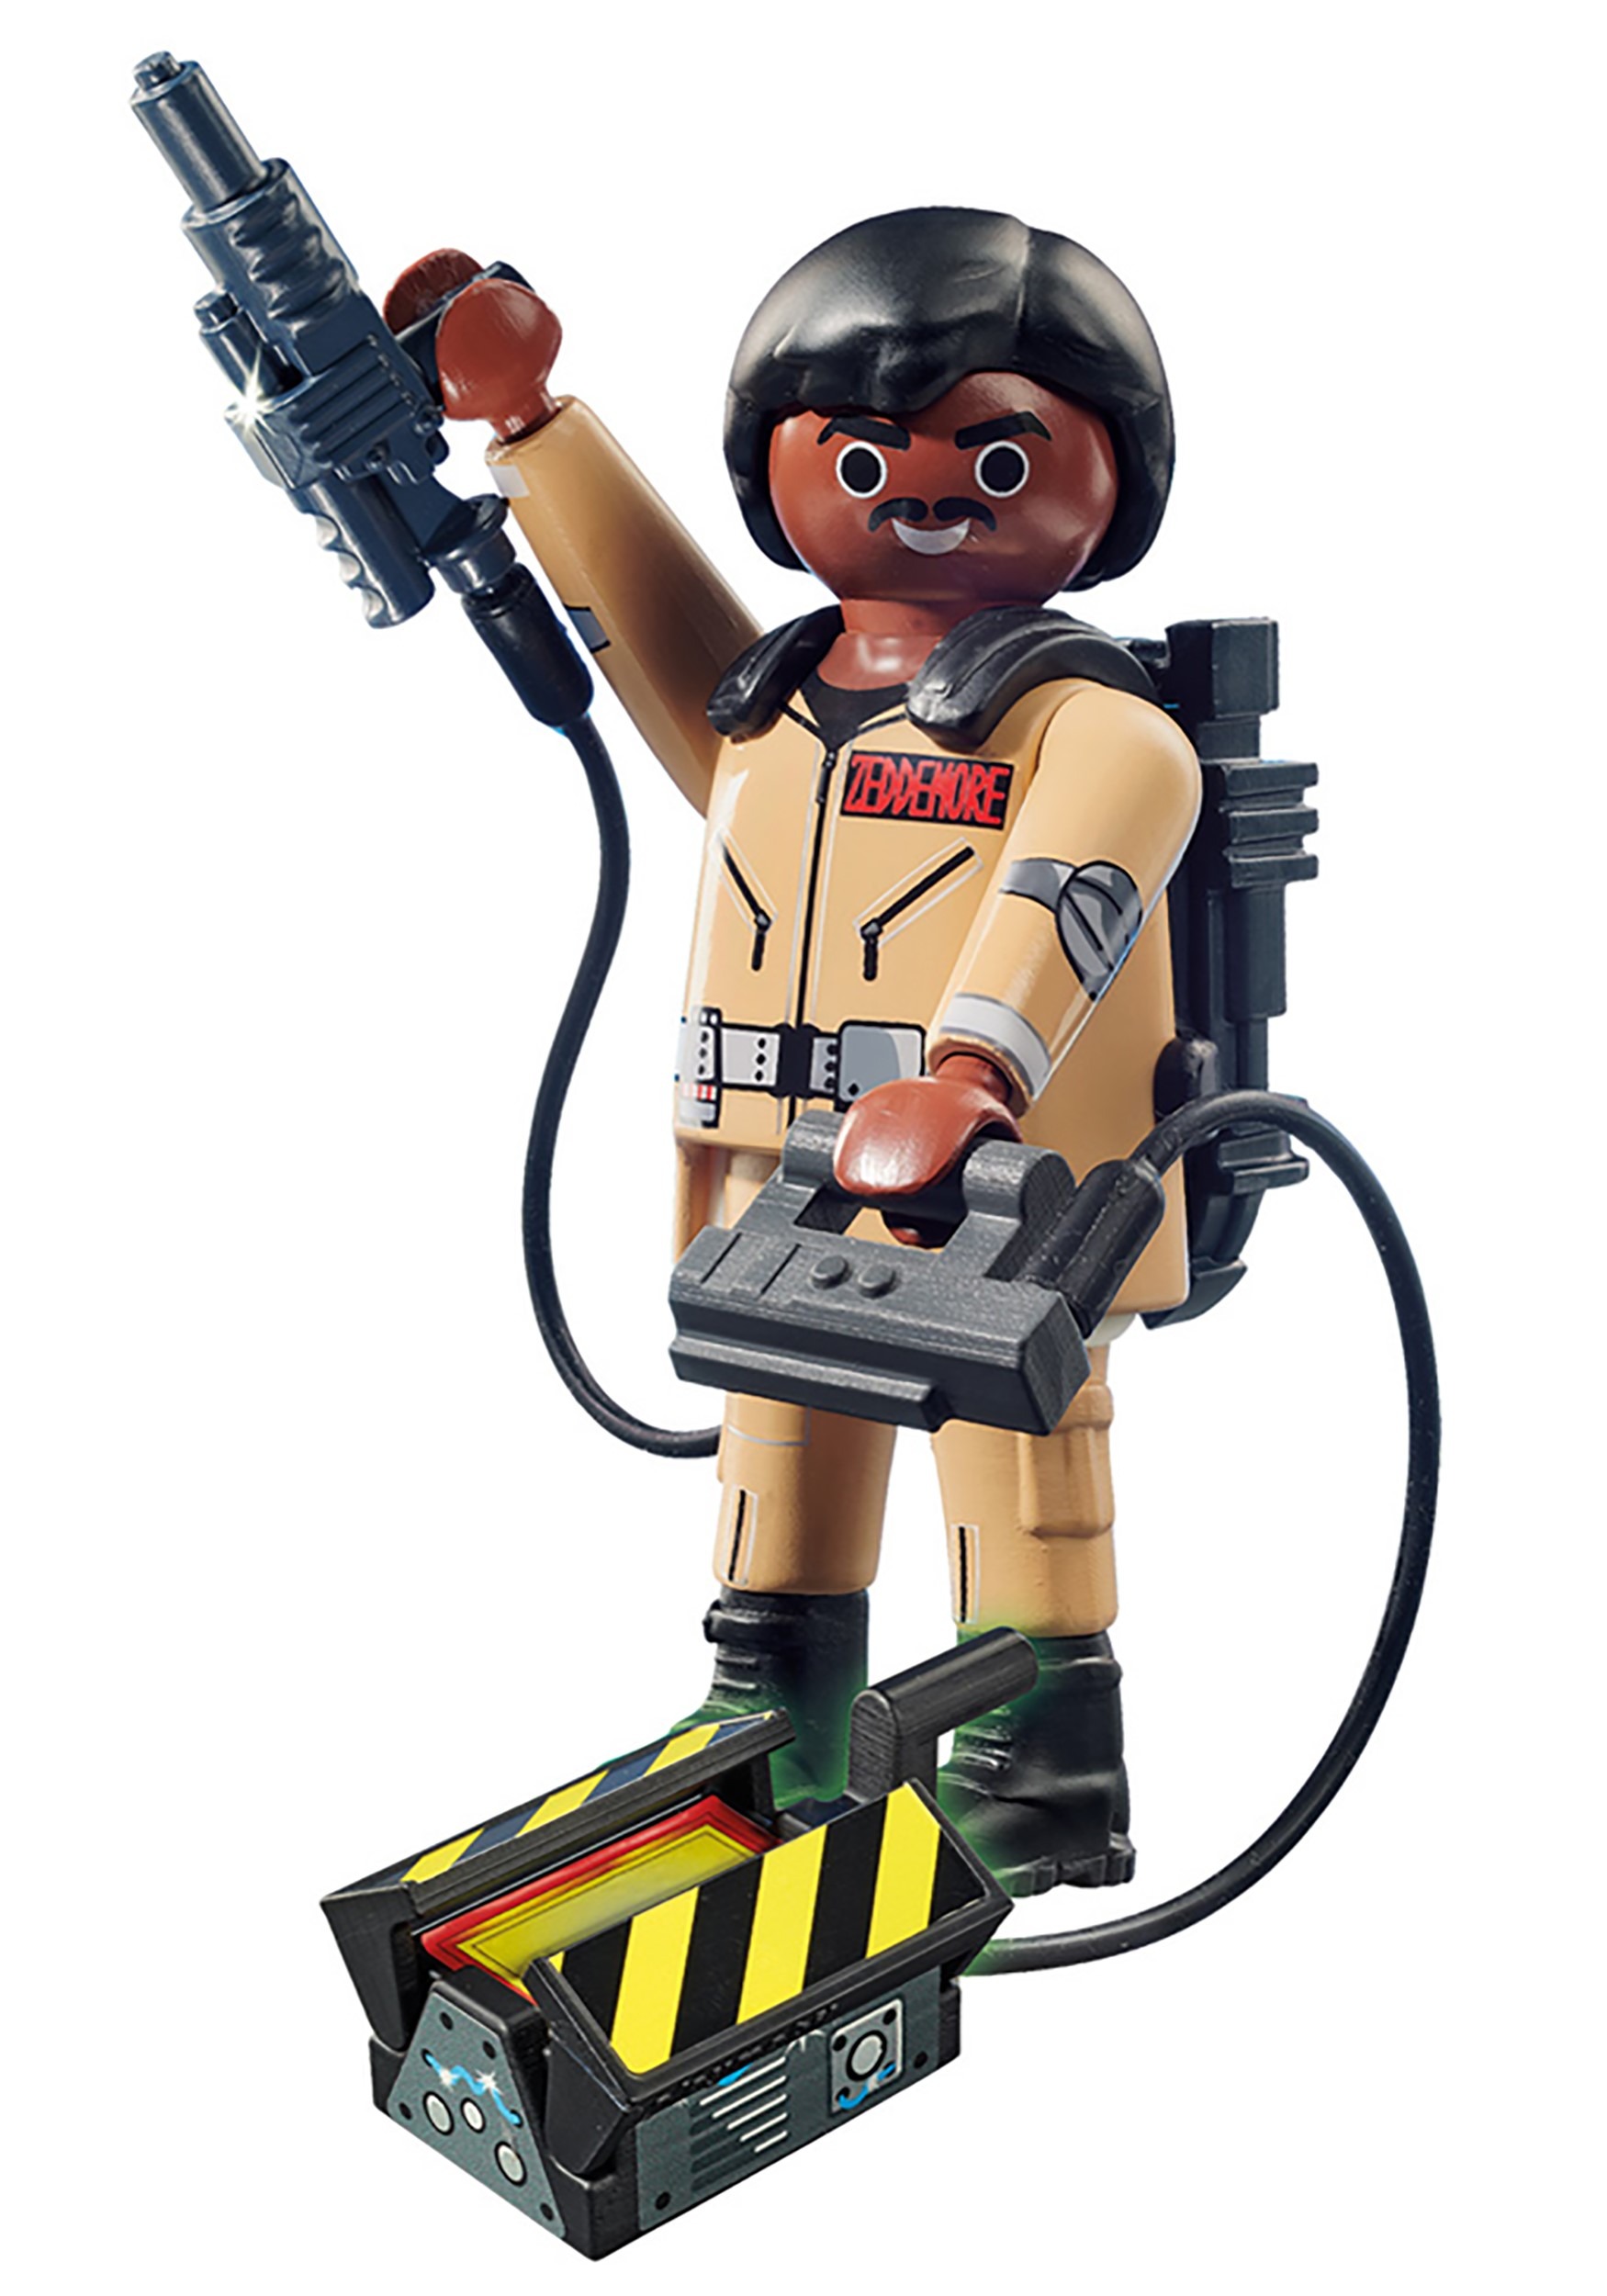 Collector's Edition Playmobil Ghostbusters W. Zeddemore Figure